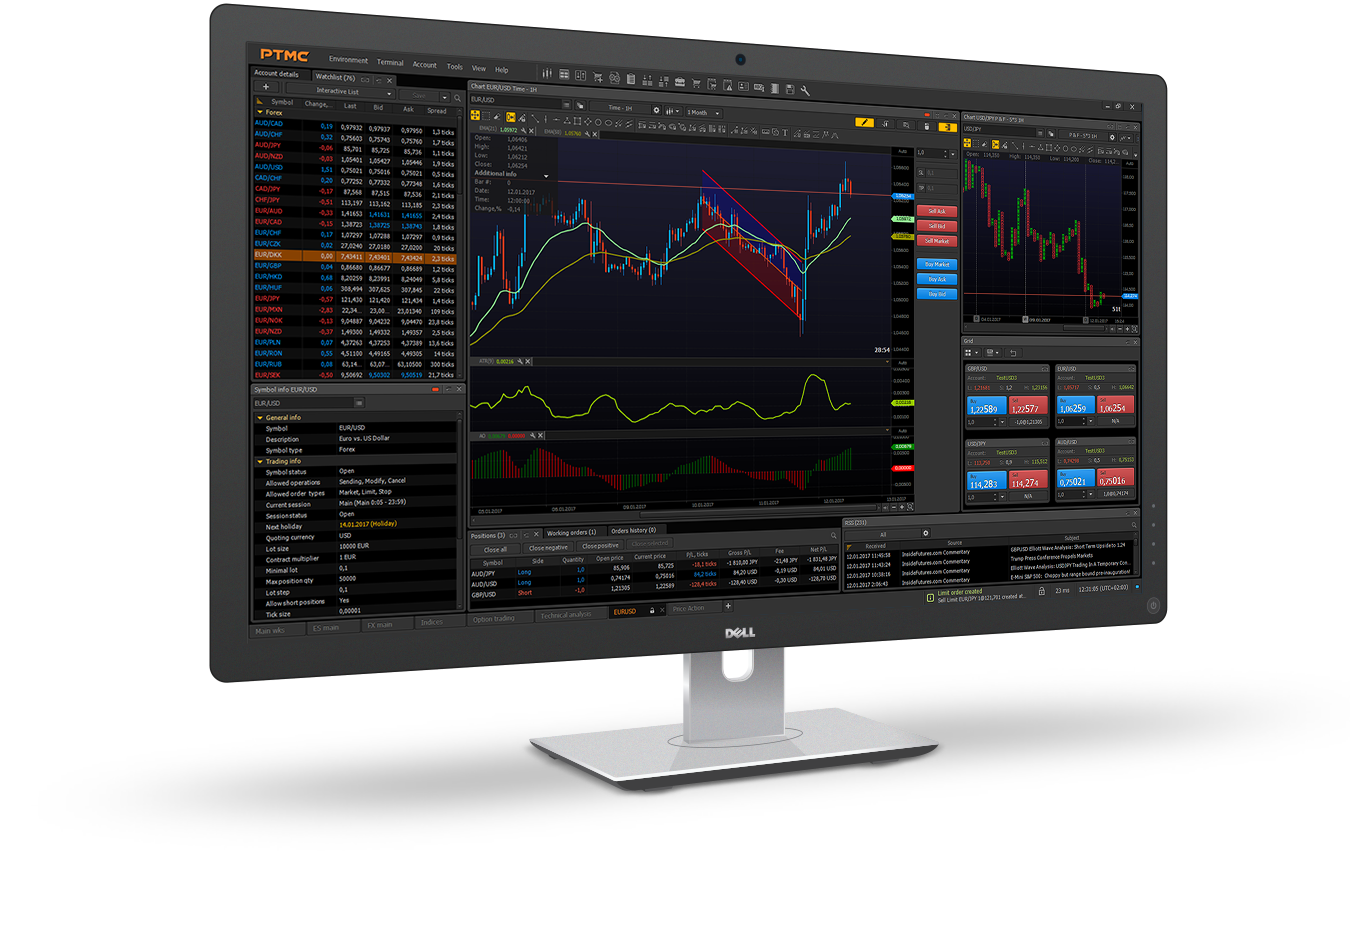 PTMC trading platform for Forex and CFDs